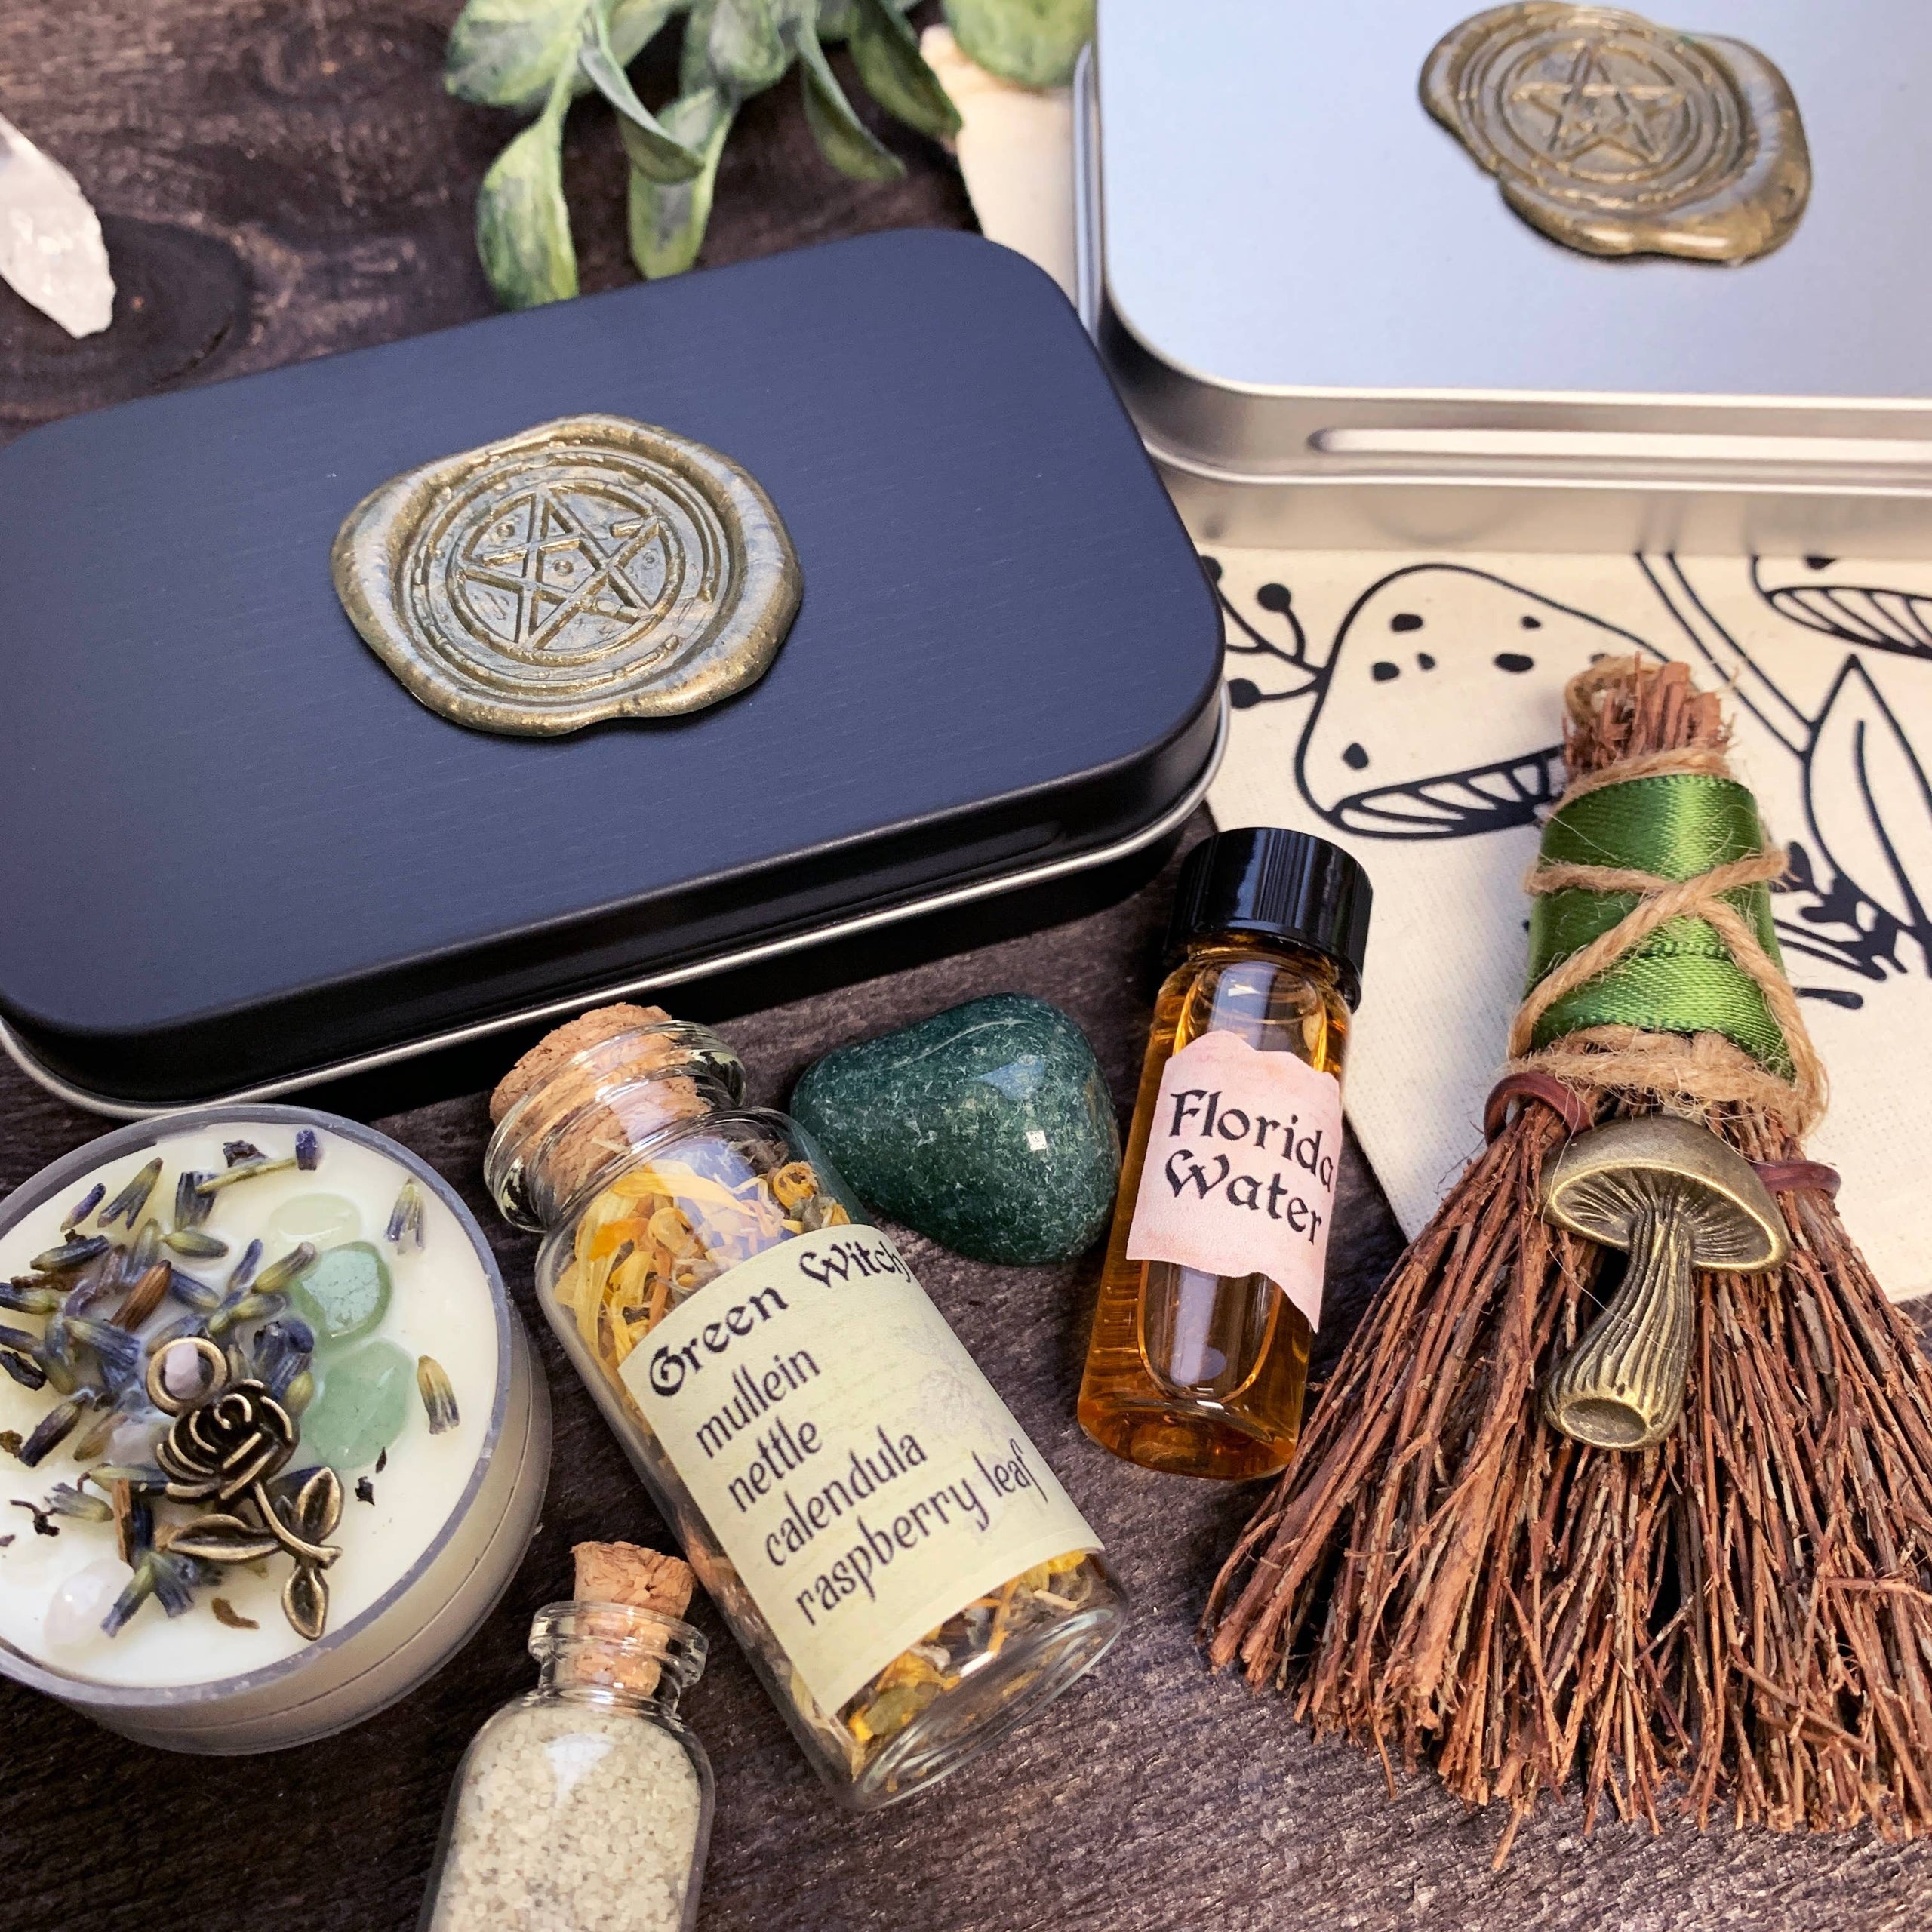 Green Witch Travel Altar, Witch Kit, Forest Witch, Cottagecore, Spell  Bottle, Manifestation, Witchcraft Kit, Wiccan, Ritual Kit